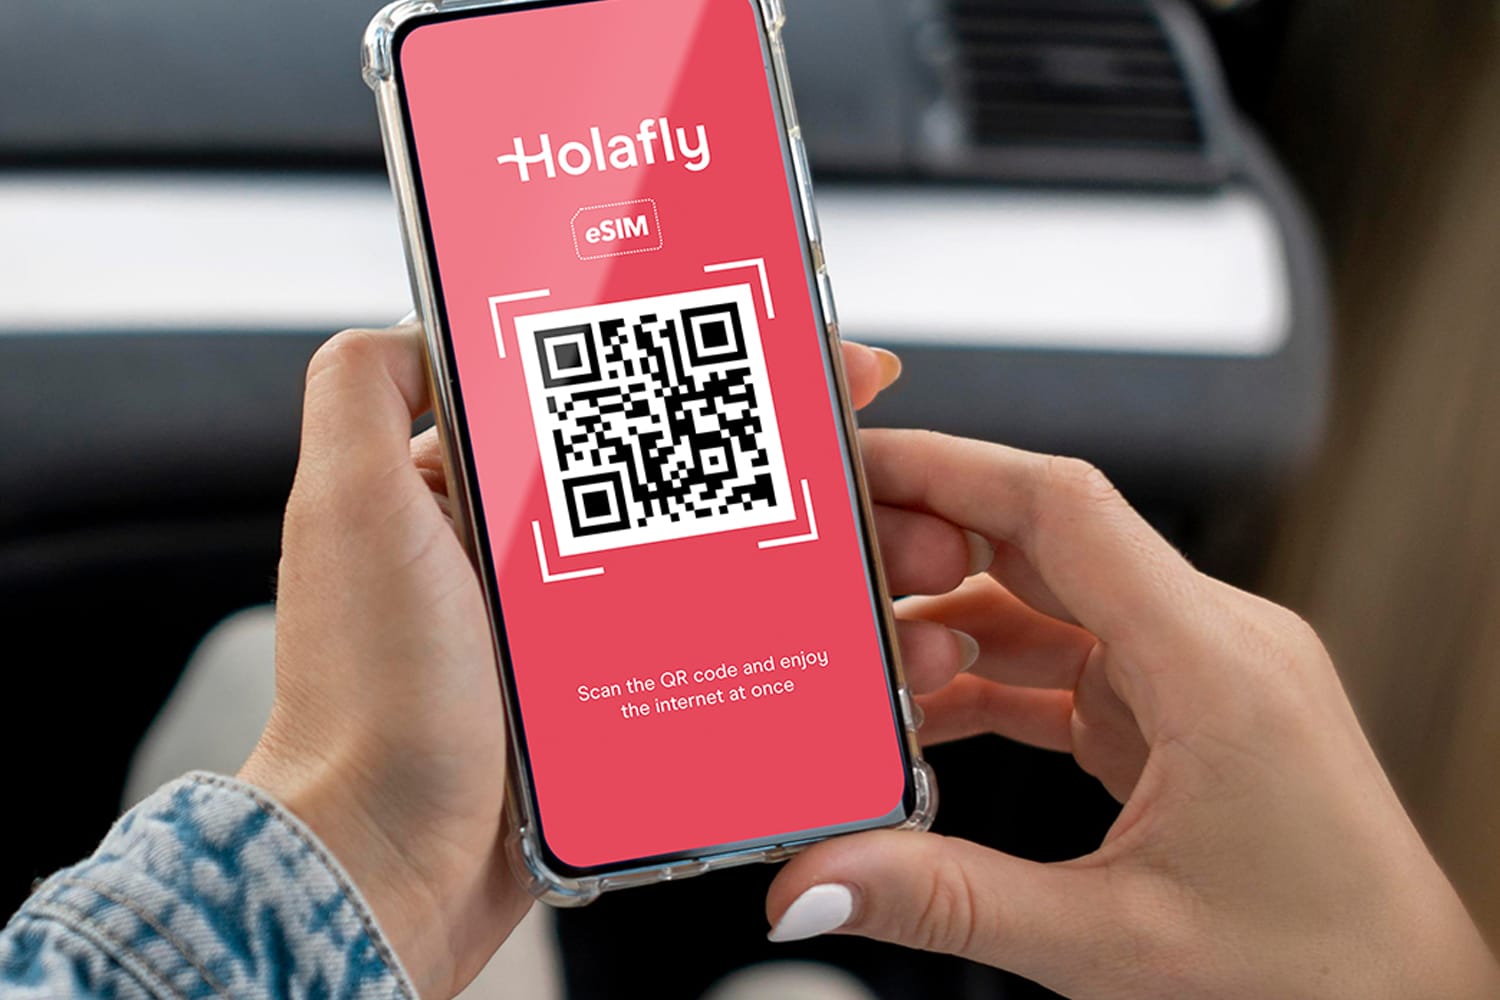 Holafly eSim Review: The Best eSim for Traveling in Europe?